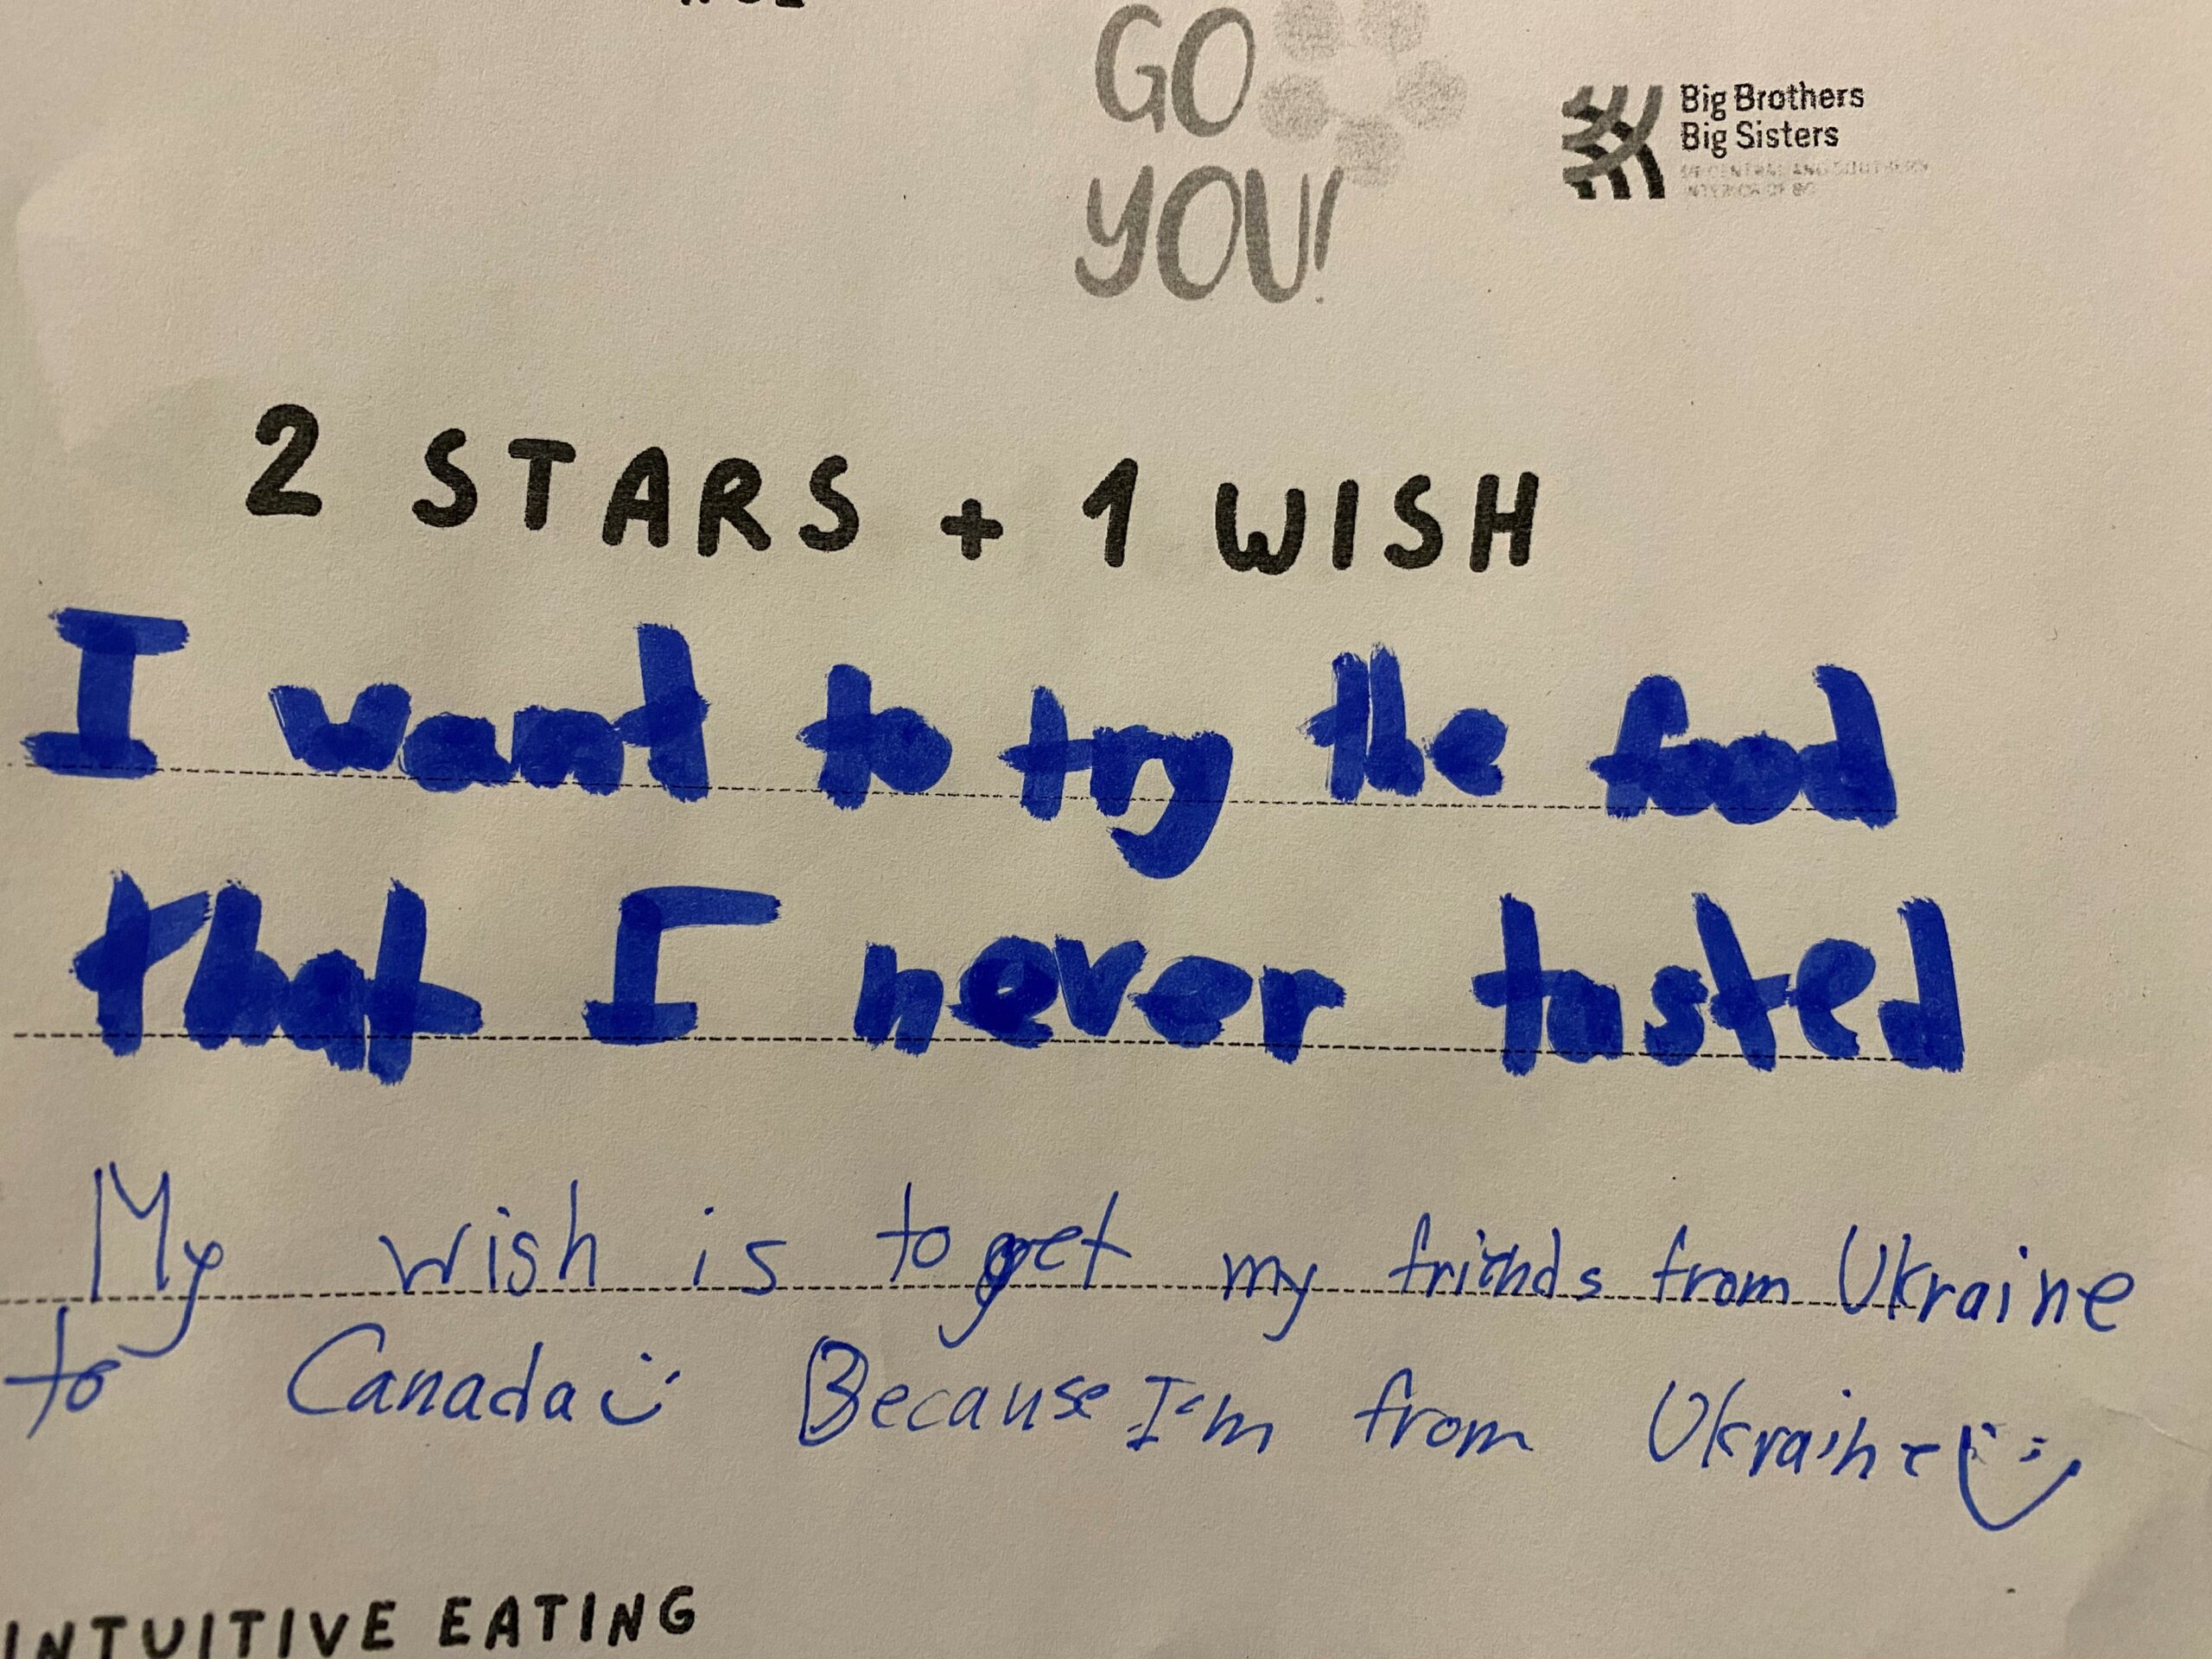 2 Stars + 1 Wish: ★ I want to try the food that I never tasted ♥ My wish is to get my friends from Ukraine to Canada because I am from Ukraine